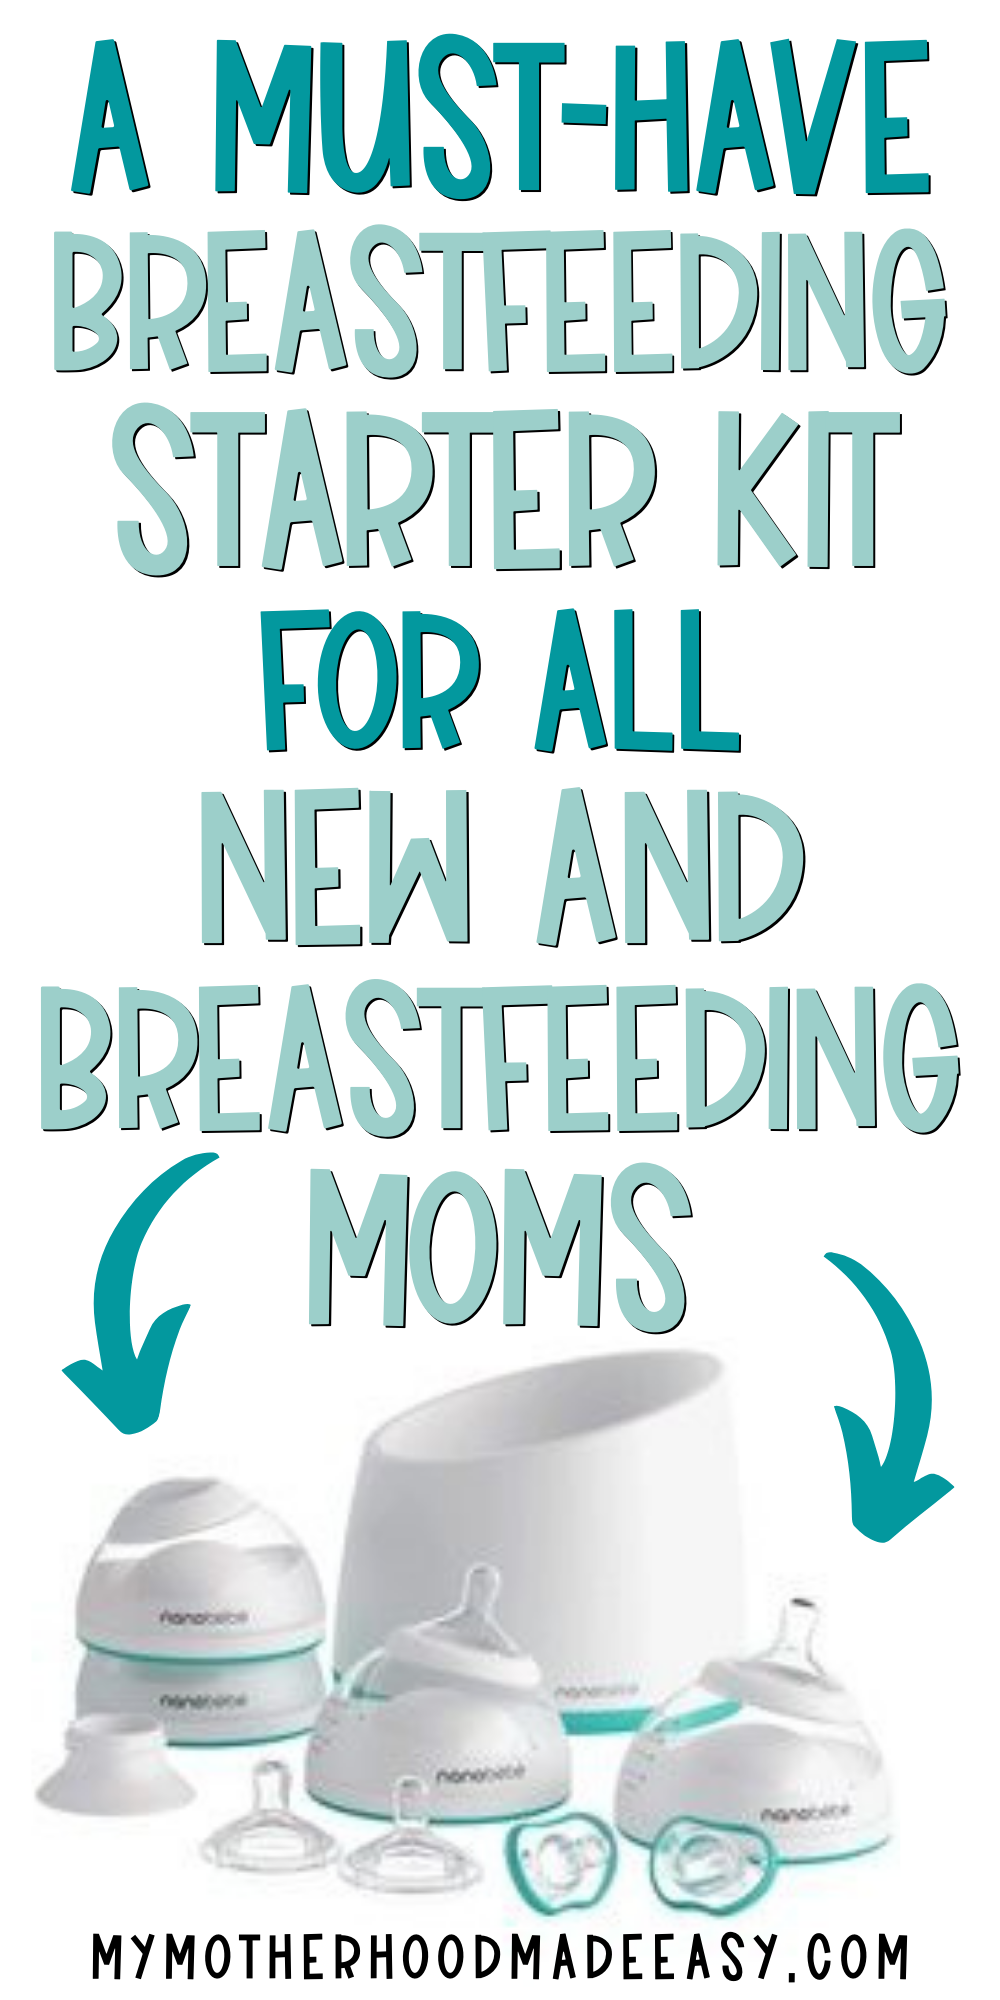 If you are a breastfeeding mother or a mommy to be that is looking for a honest review on the Nanobebe's Starter Kit, Check this review out before buying! #breastfeeding #mom #newmom #babyregistry #gift #babygift #newborn best breastfeeding products best products for breastfeeding breastfeeding tips breastfeeding must haves products top breastfeeding products it works products safe for breastfeeding it works products while breastfeeding